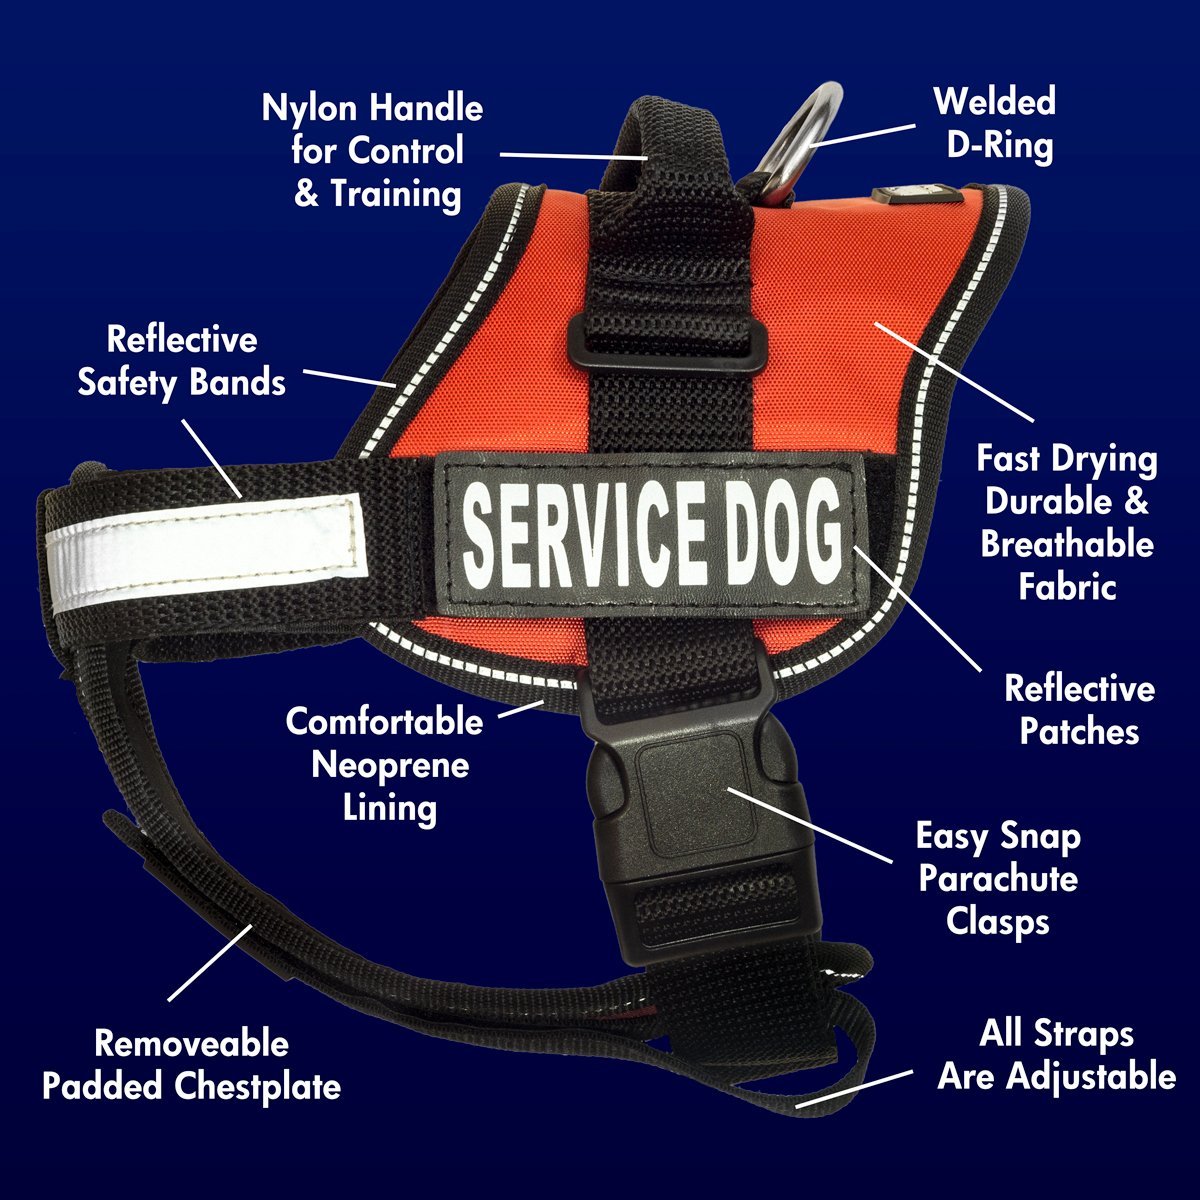 Red service dog harness with reflective band.